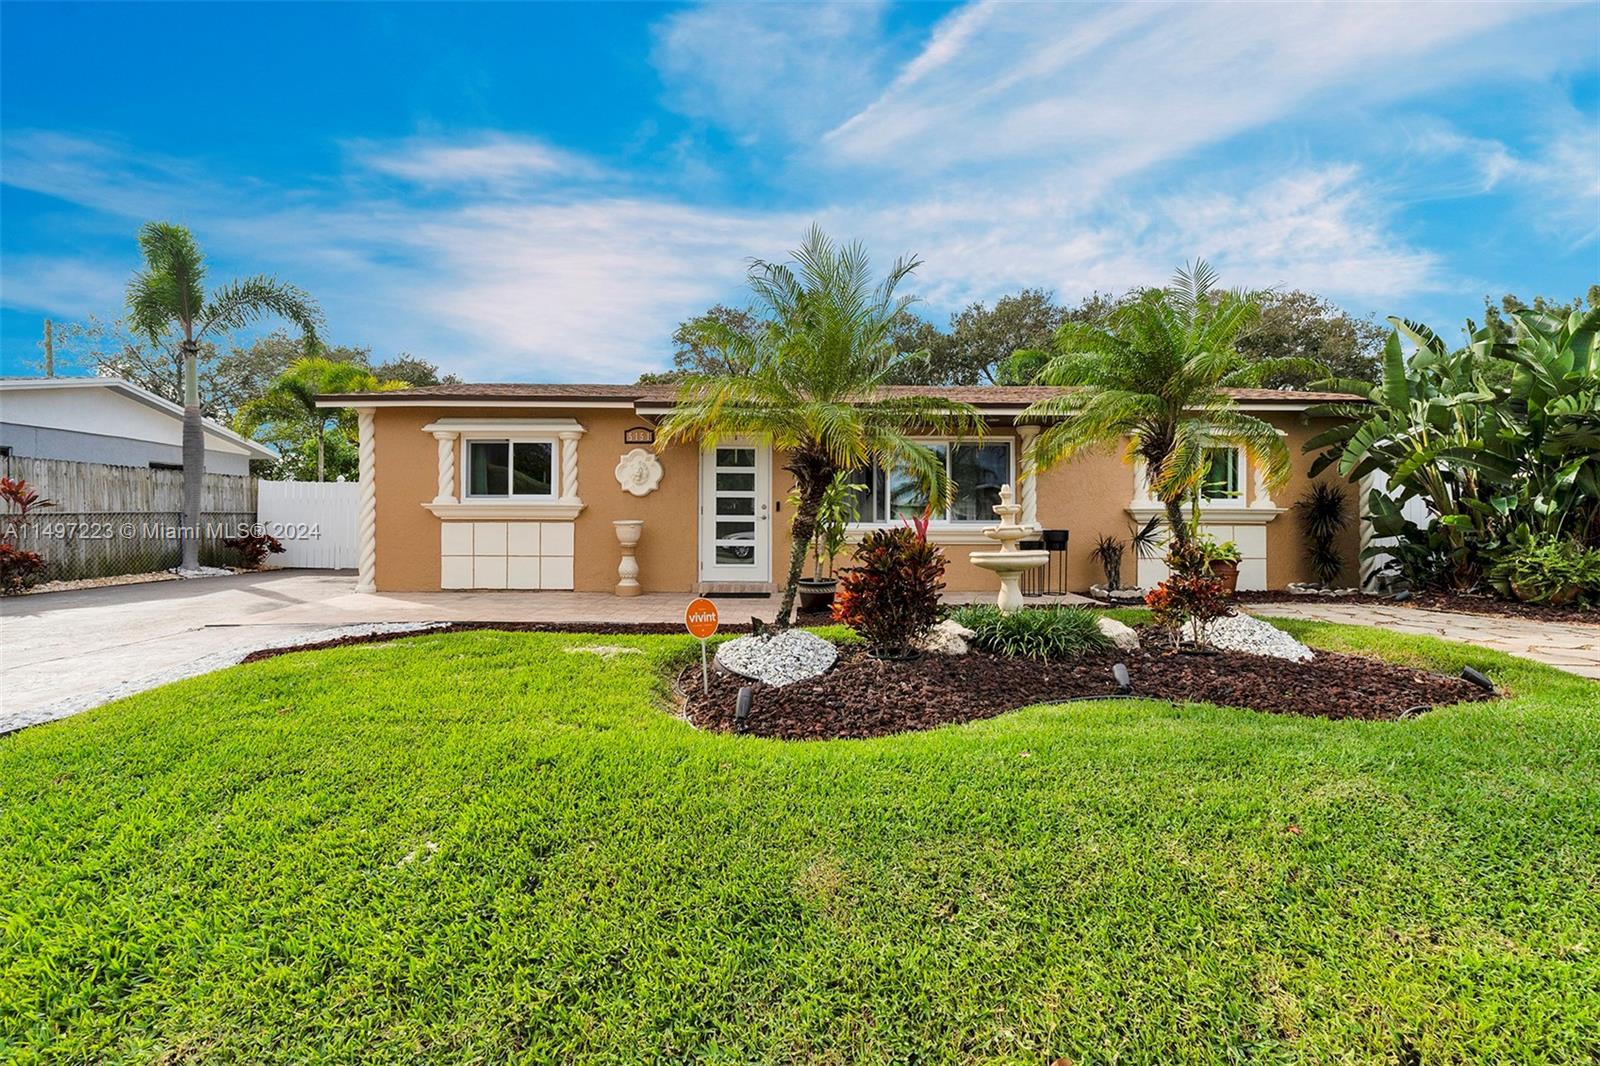 Welcome Home! Step into your dream oasis - a fully renovated, single-family paradise! This turnkey g